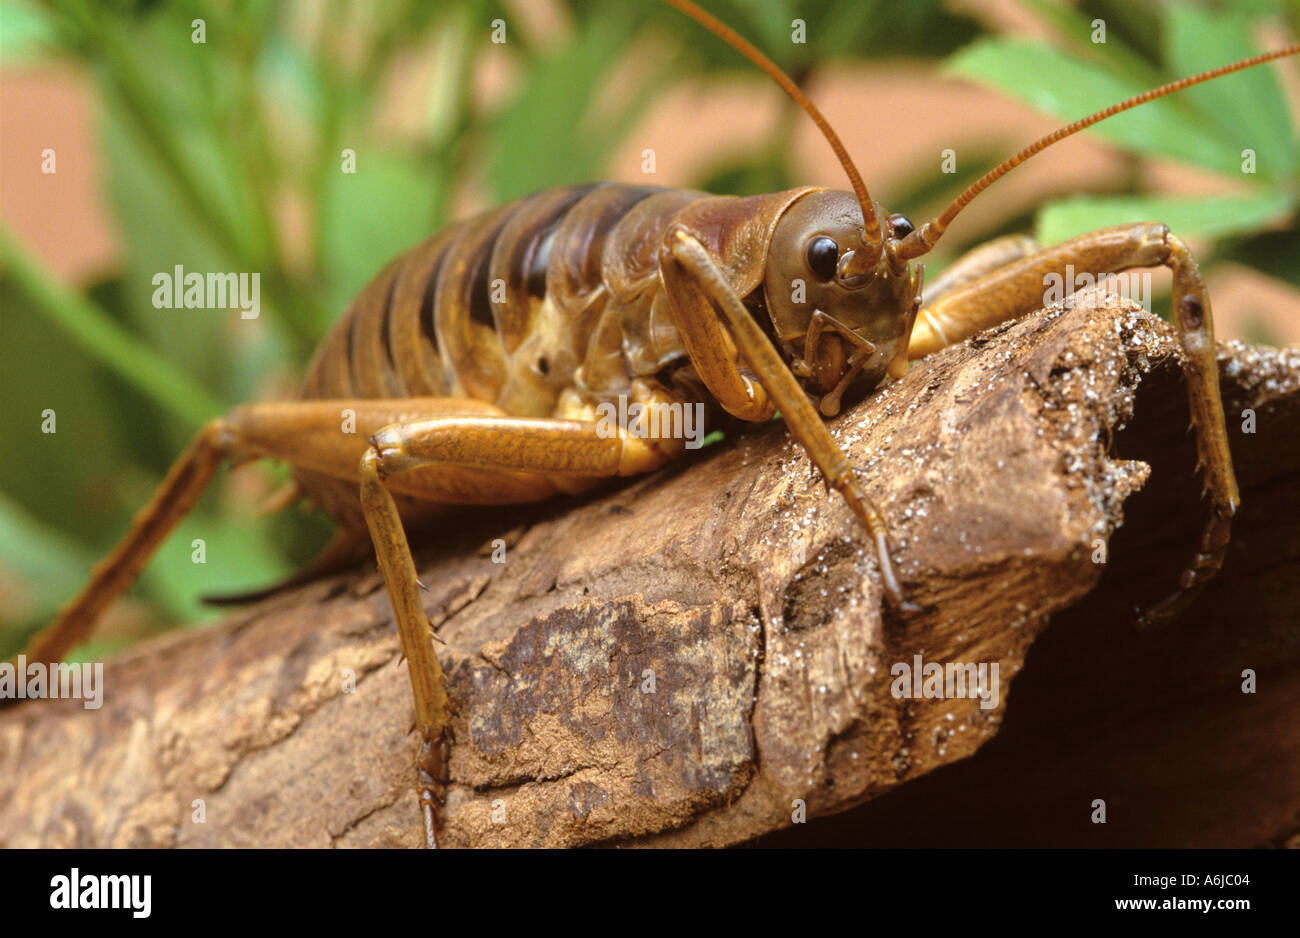 Giant weta from new Zealand worlds largest cricket and one of largest insects Stock Photo